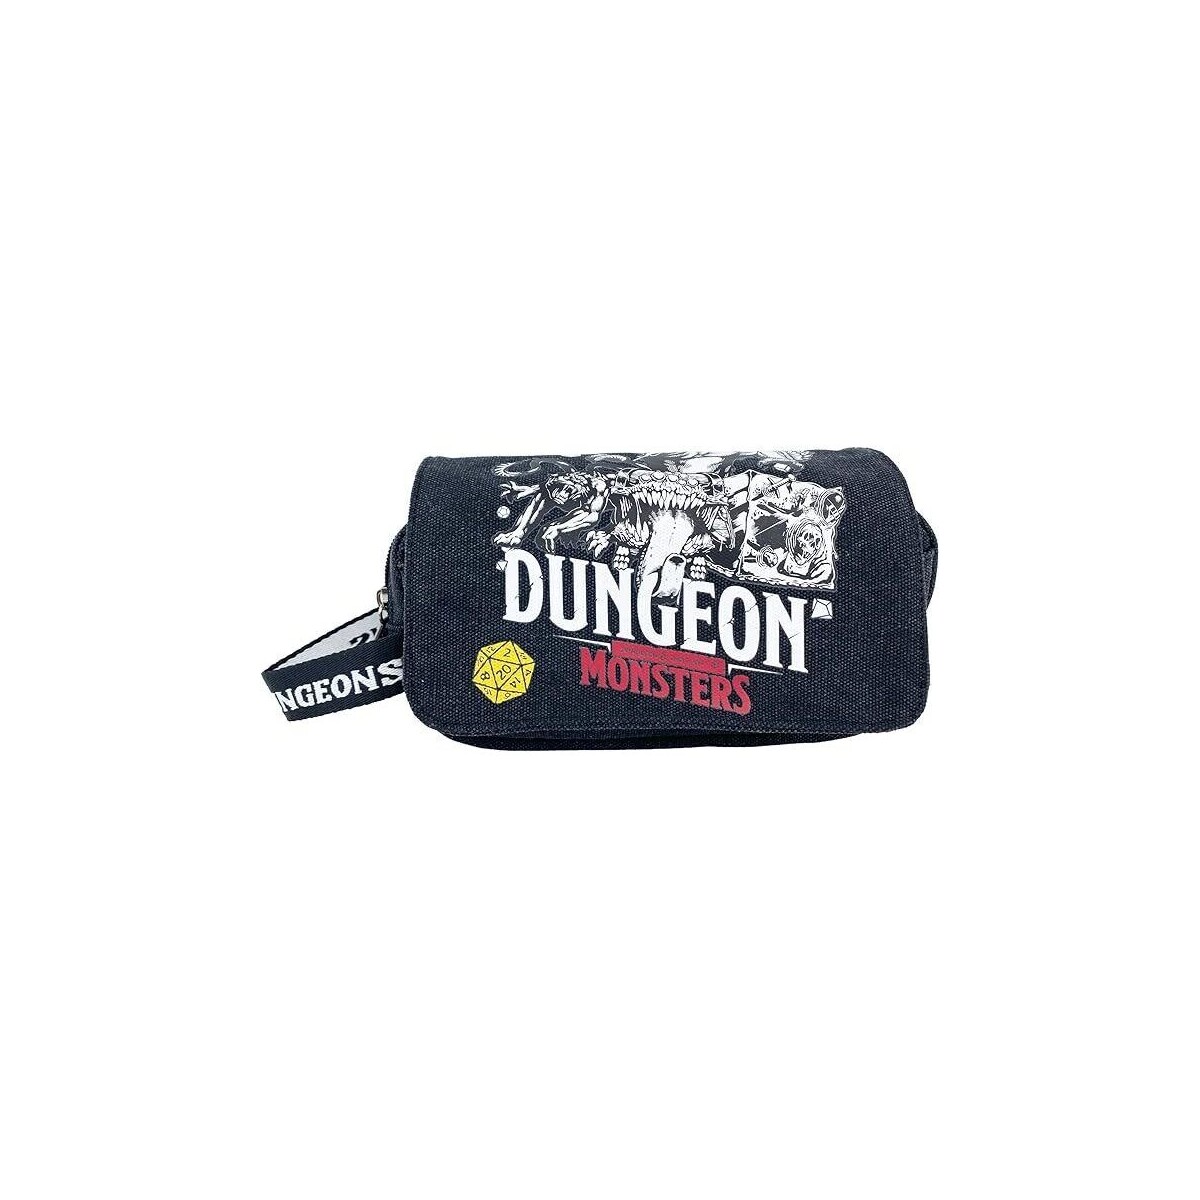 Malas Necessaire Dungeons And Dragons PT-02-DD Preto